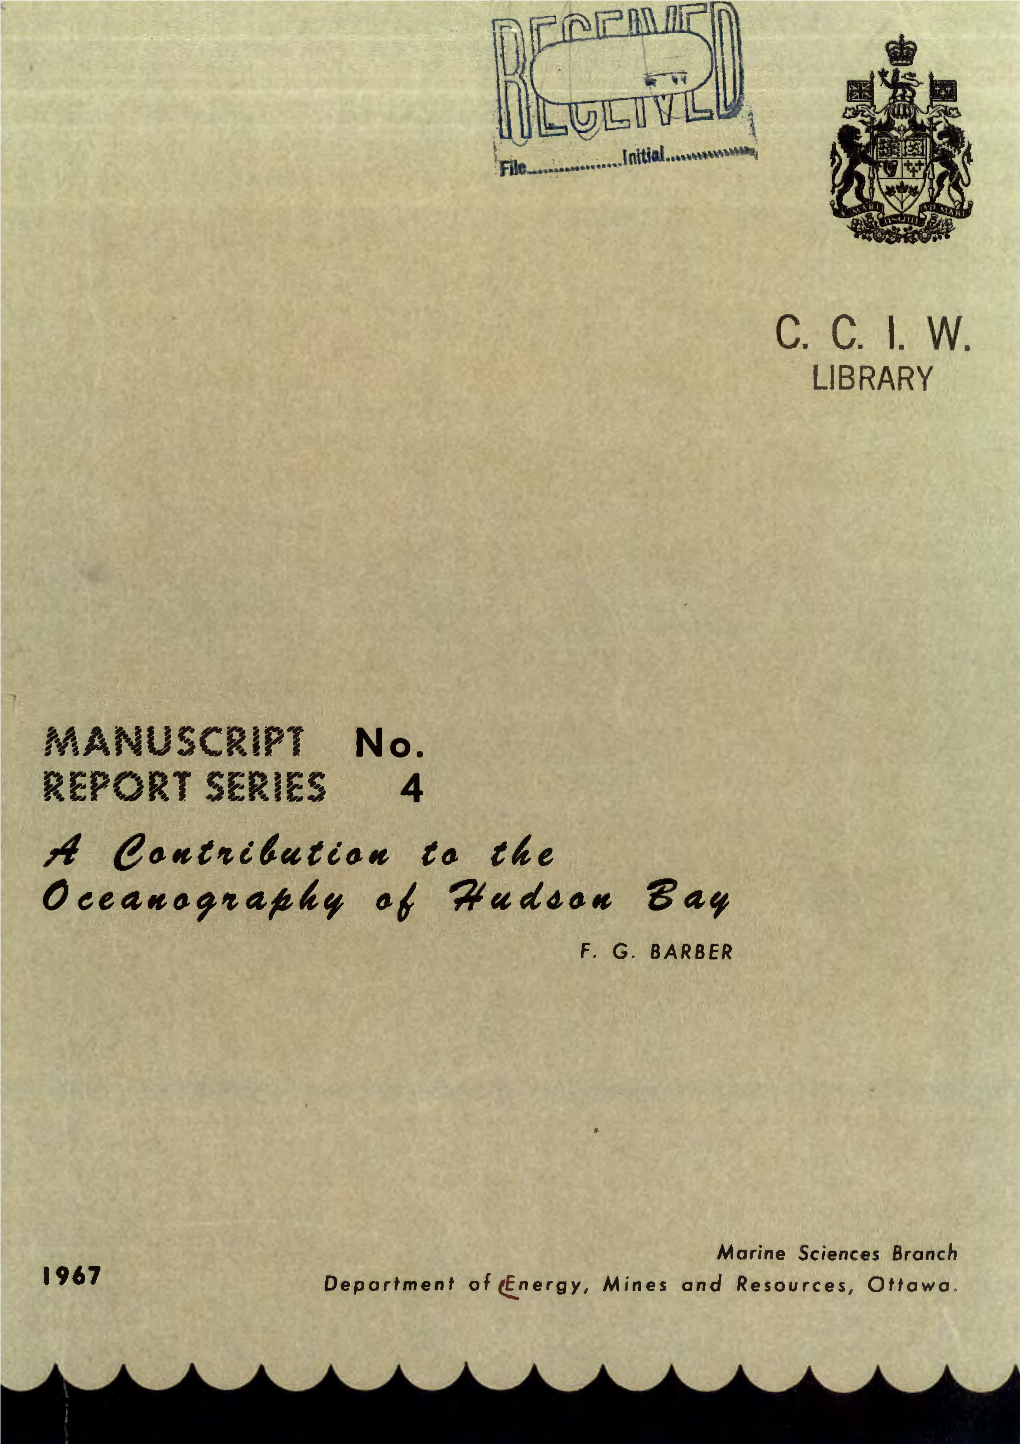 C. C. I. W. Library